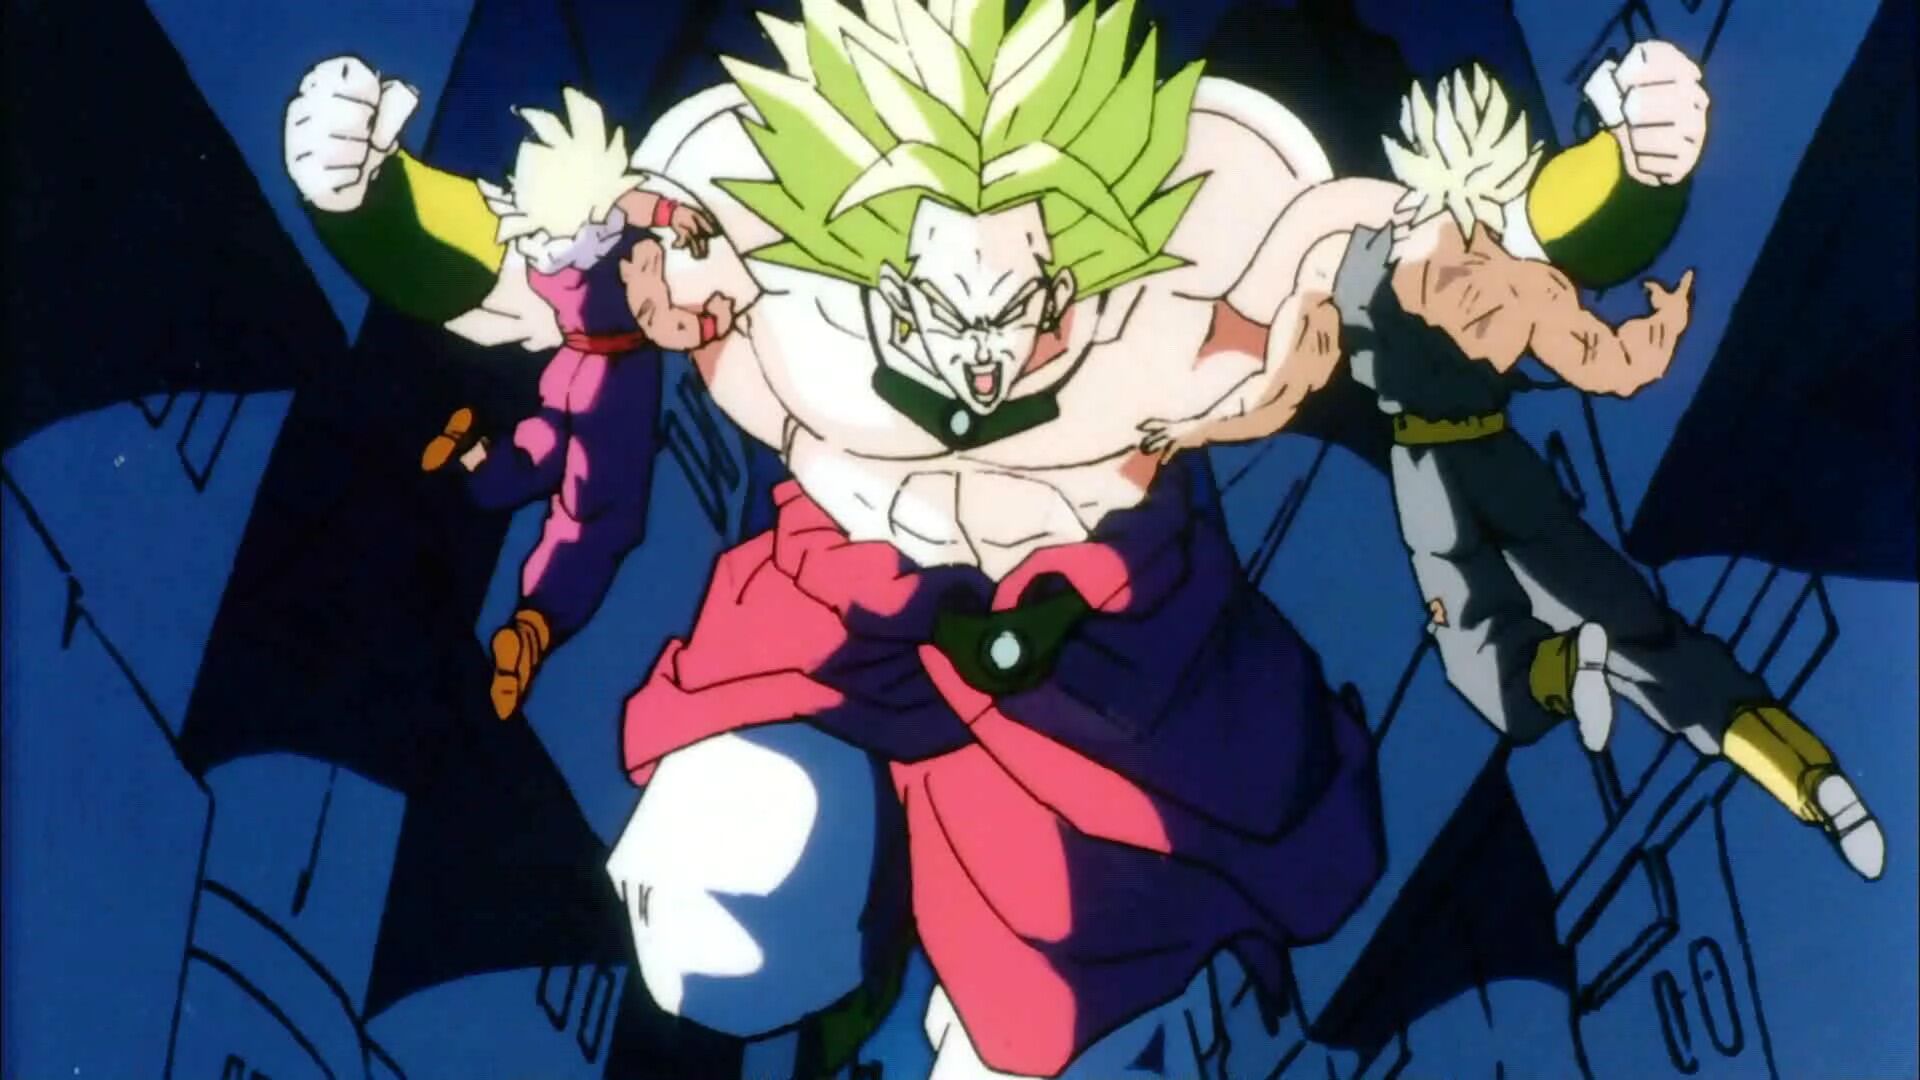 Future Trunks. Inspired by the film Broly, the legendary super saiyan